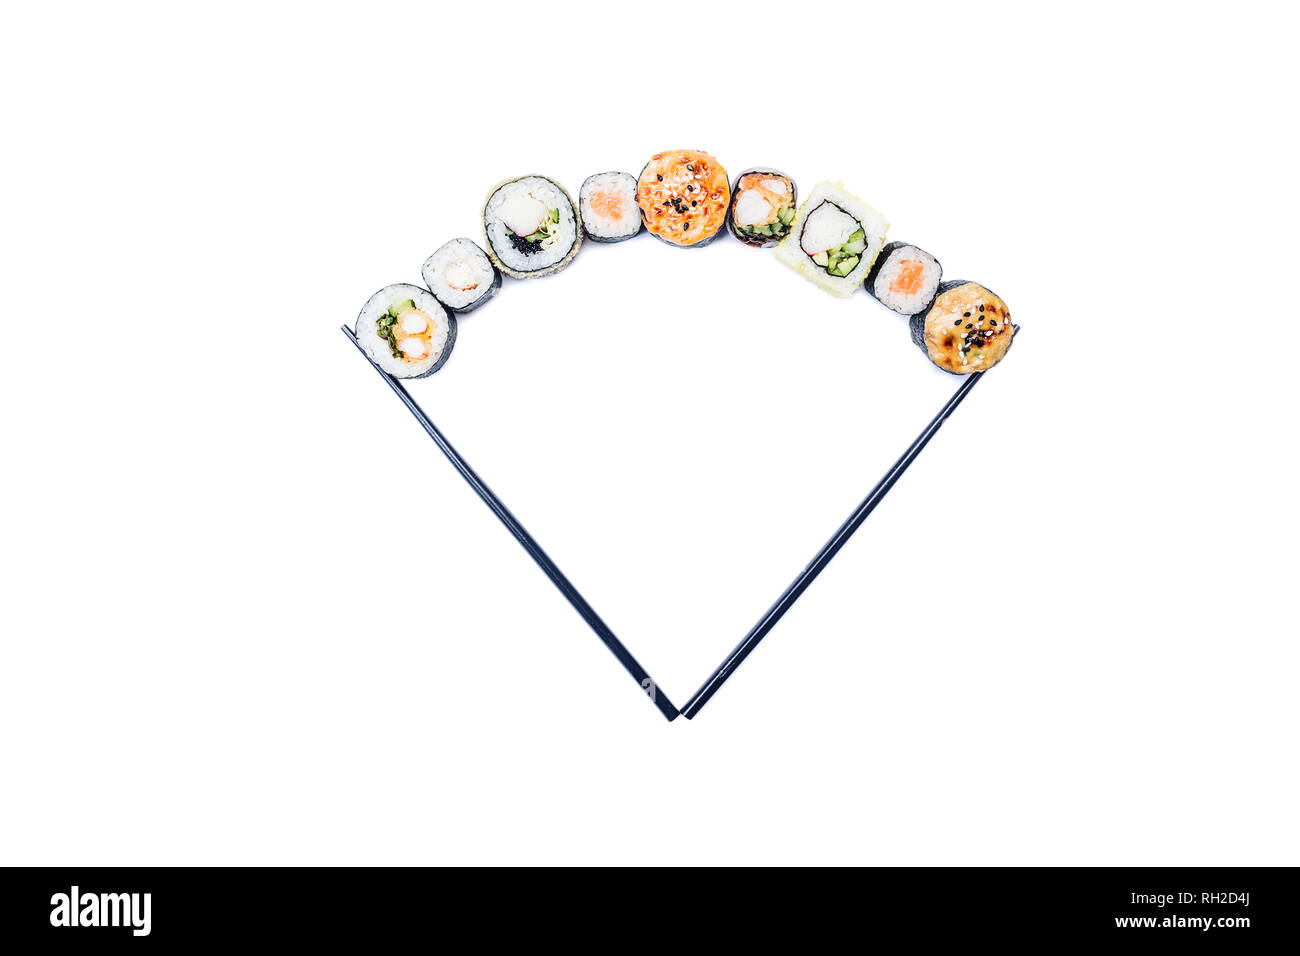 Sushi. Composition of assorted sushi rolls with chopsticks, isolated in white background Stock Photo